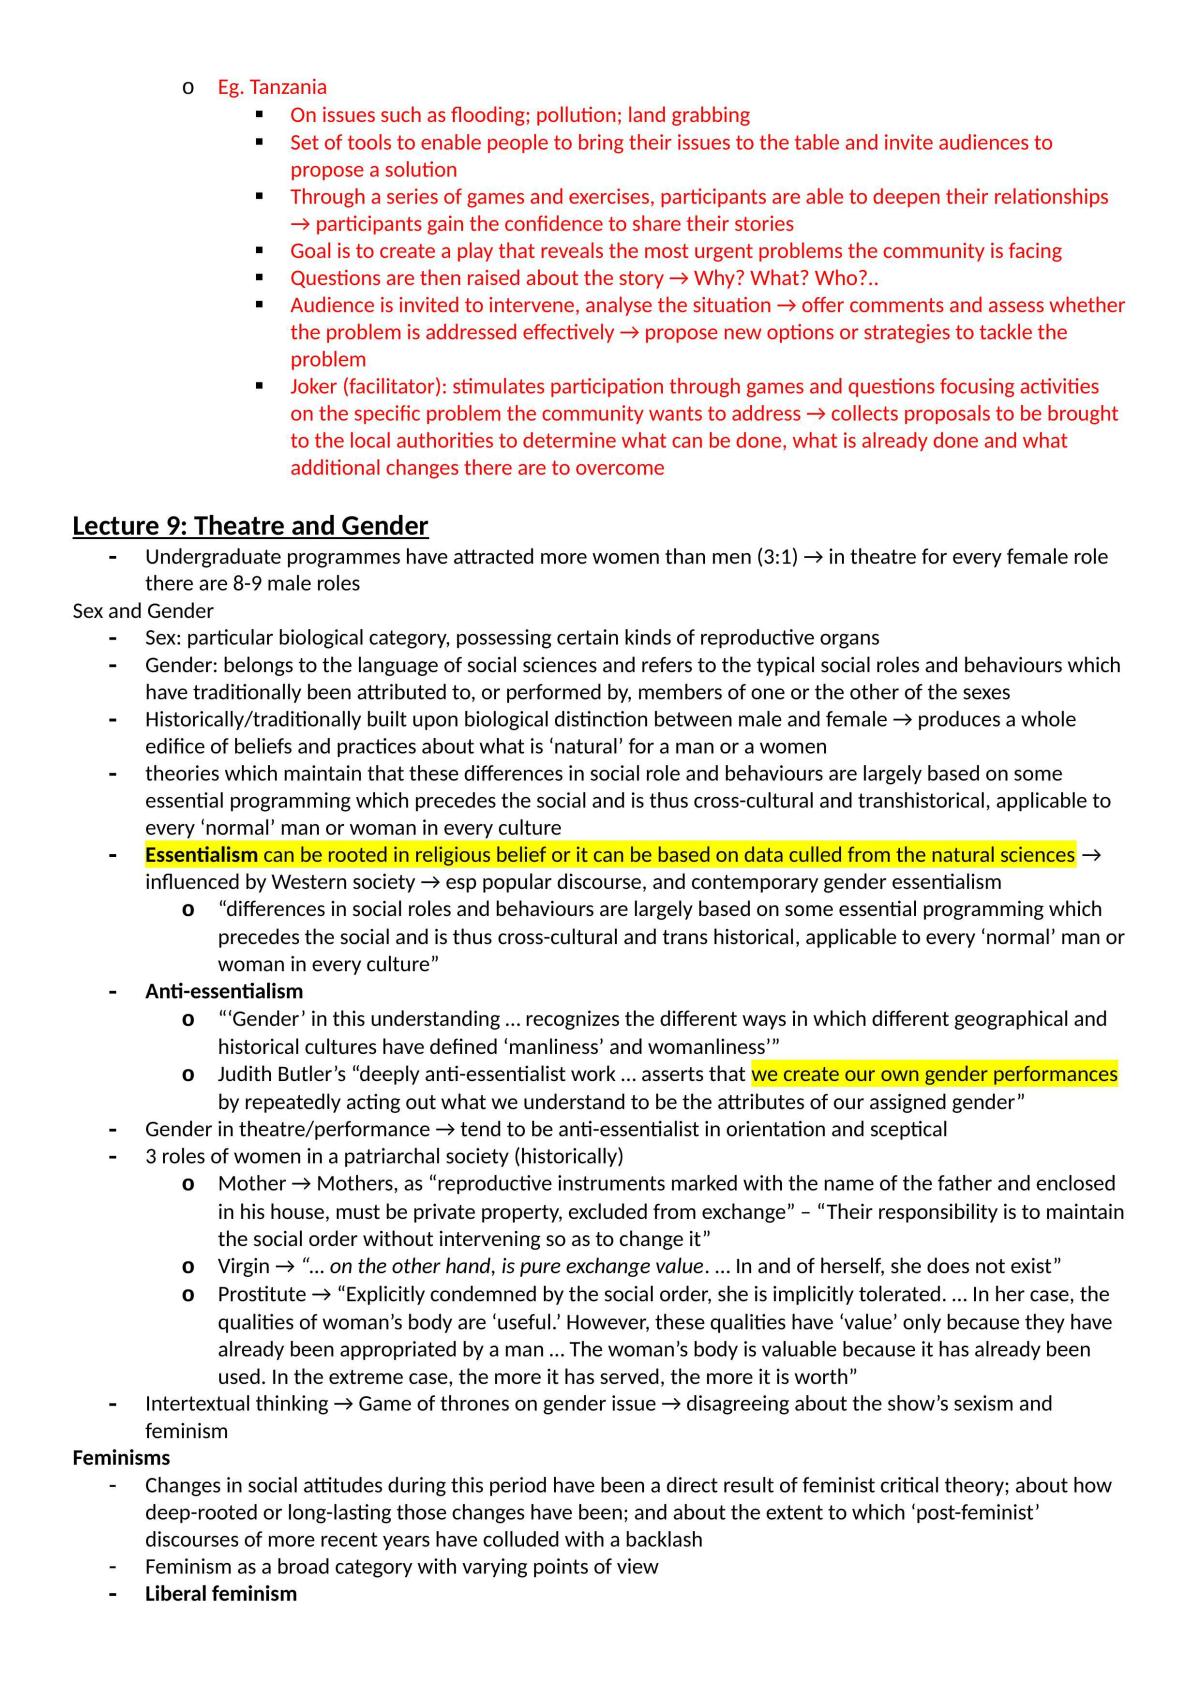 GEH1058 Full Notes - Page 15